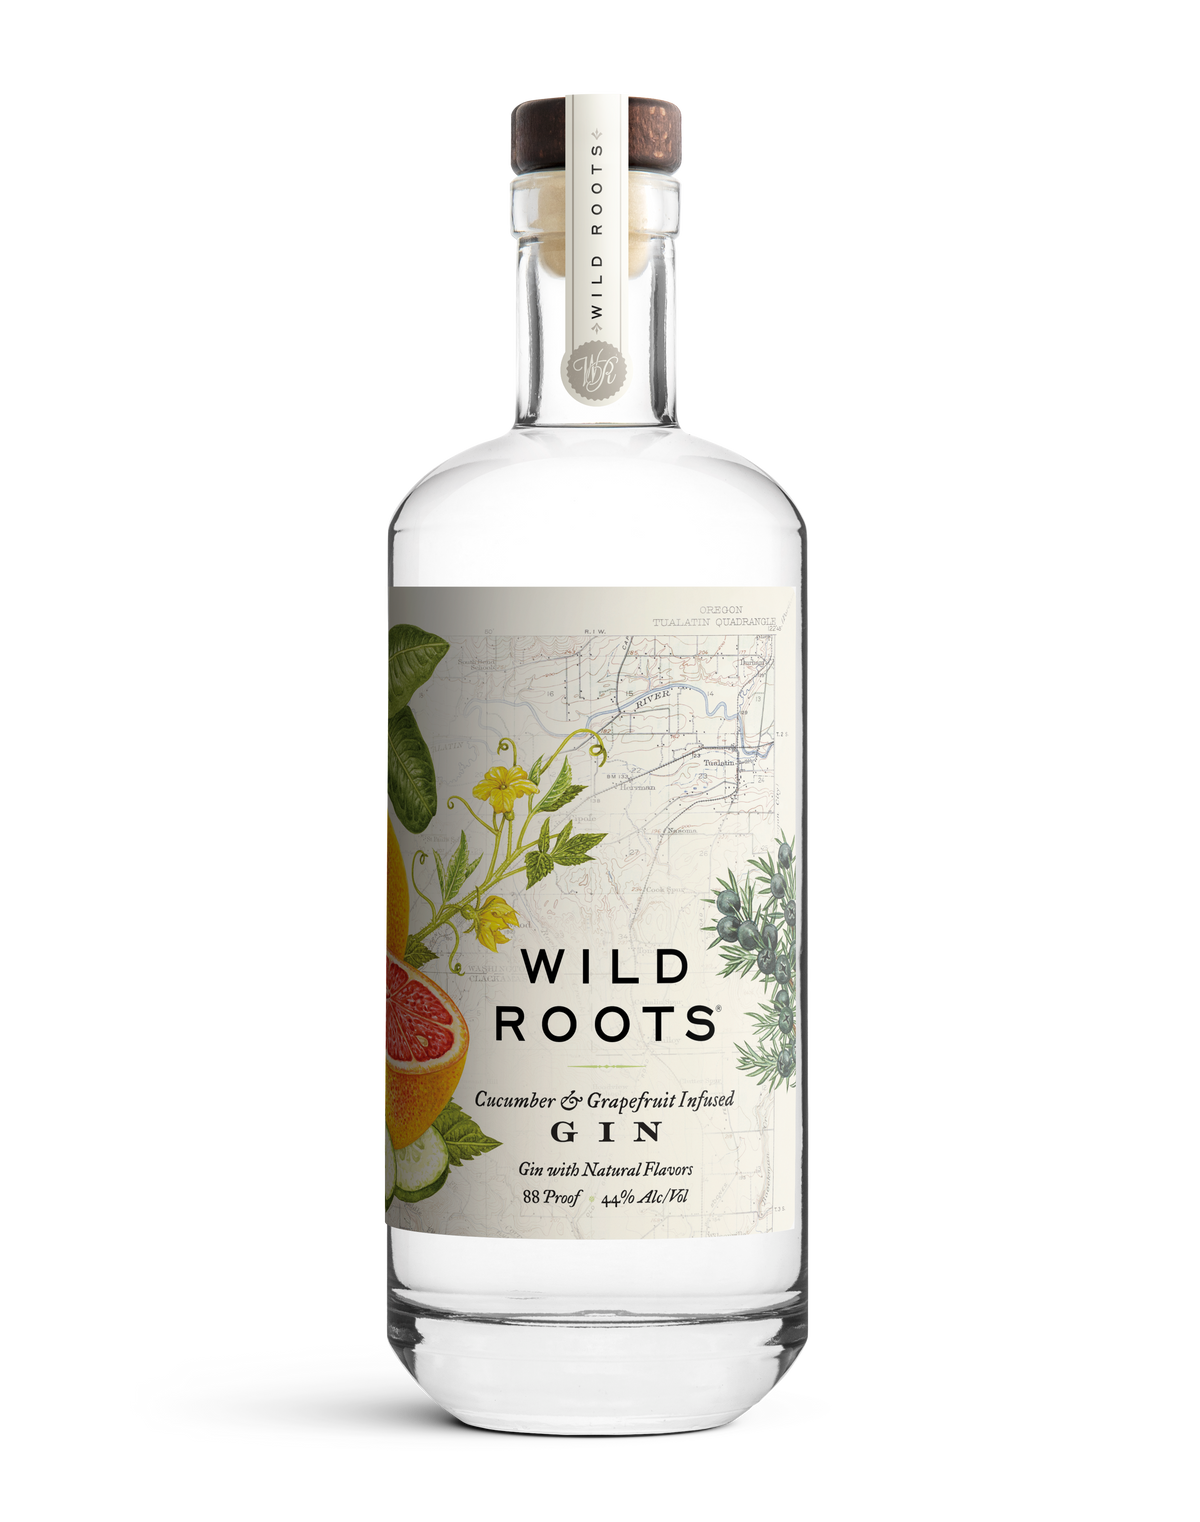 Buy Wild Roots Cucumber & Grapefruit Infused Gin Online -Supreme Booze